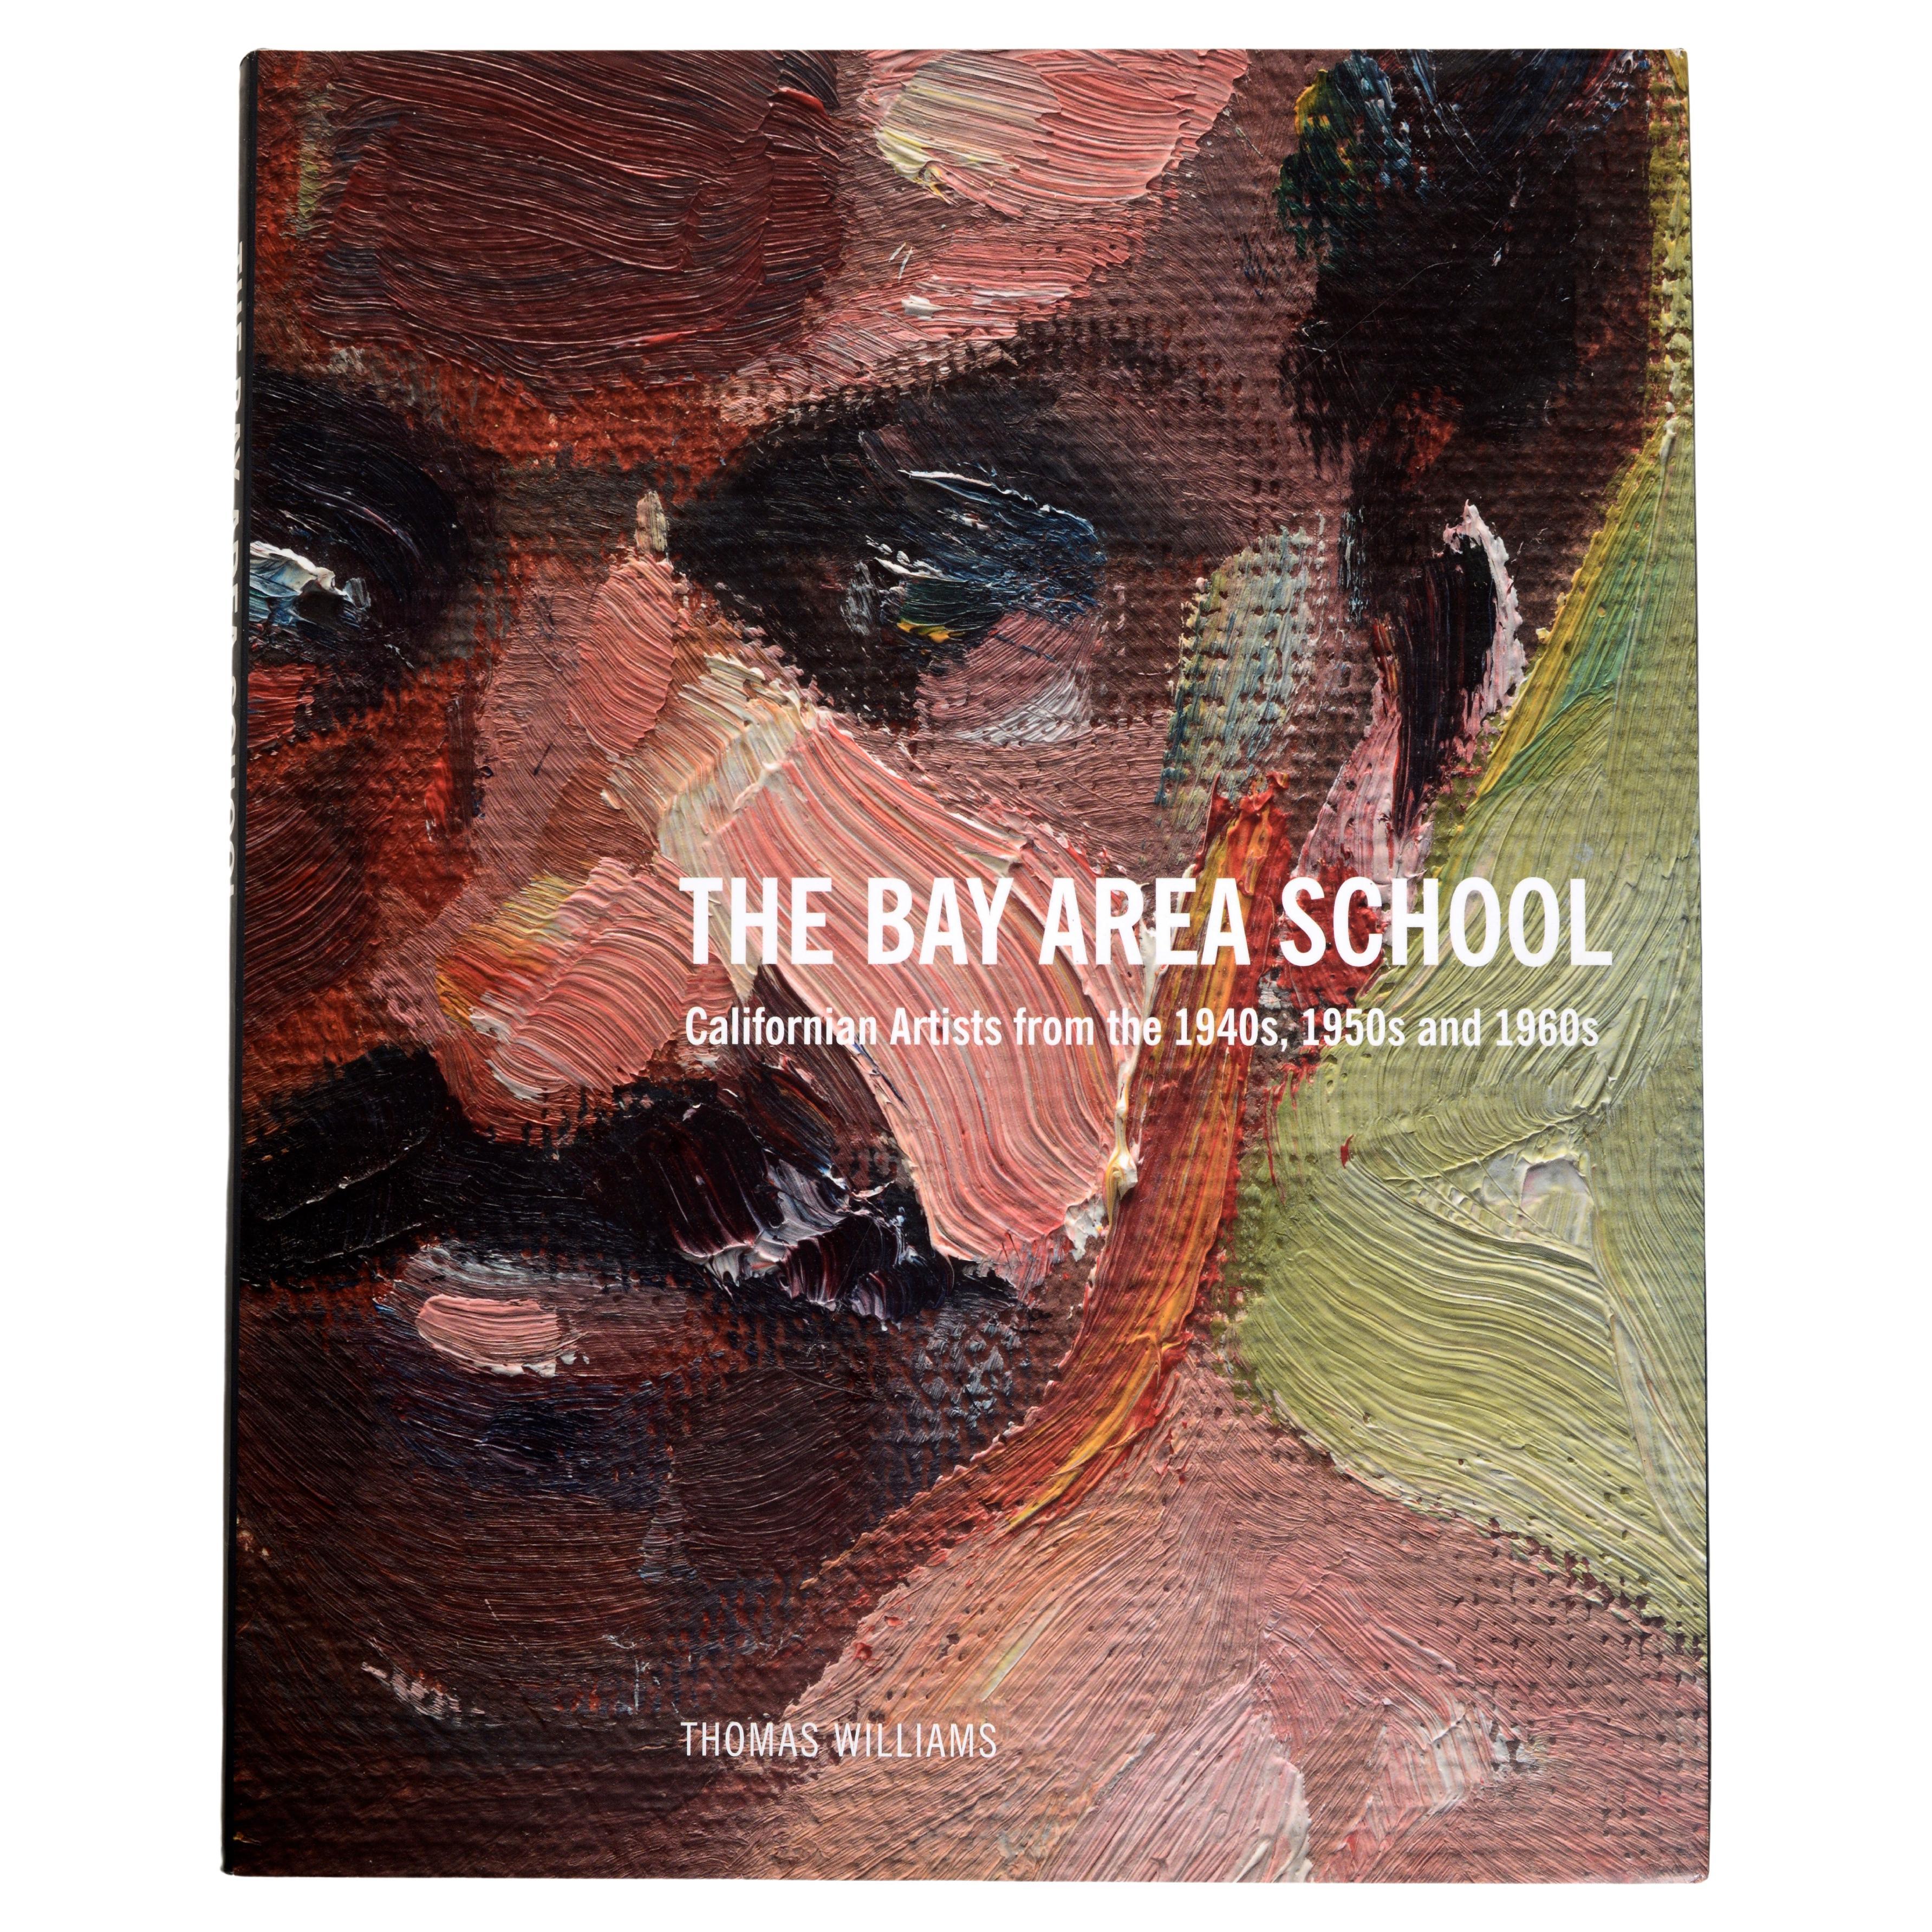  The Bay Area School: Californian Artists from the 1940s, 1950s & 1960s 1st Ed